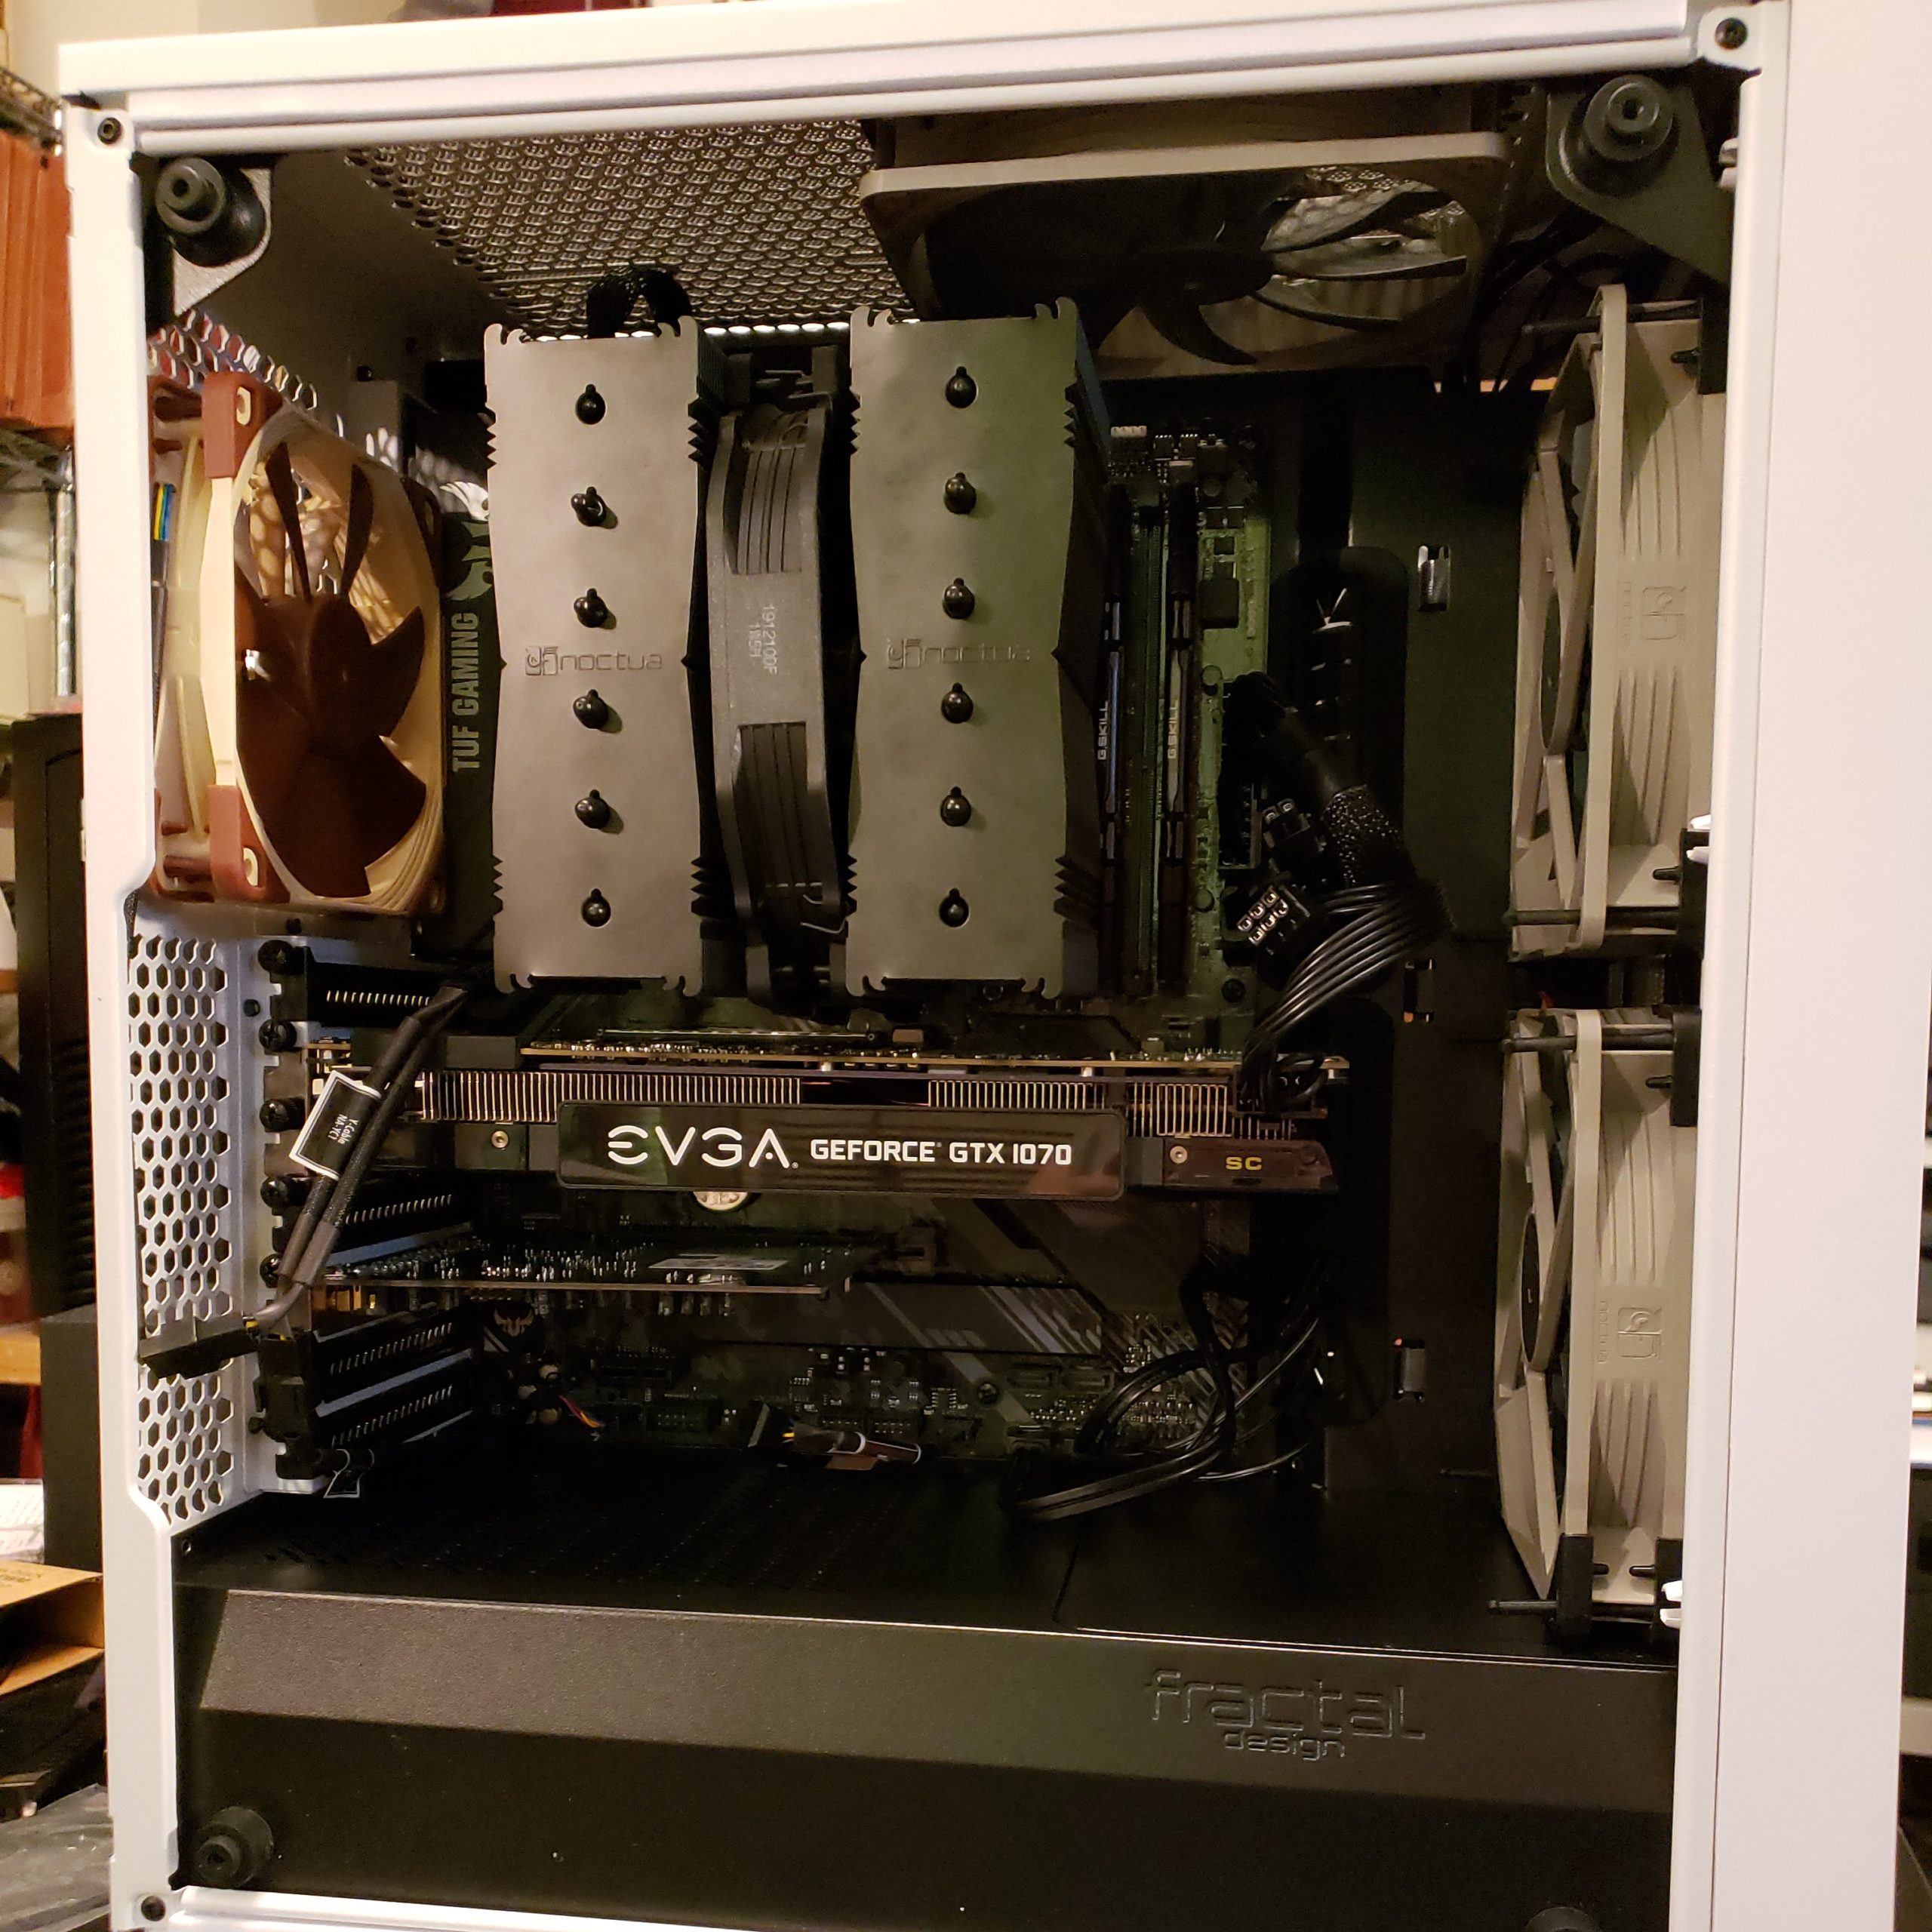 Let’s Talk About My Build